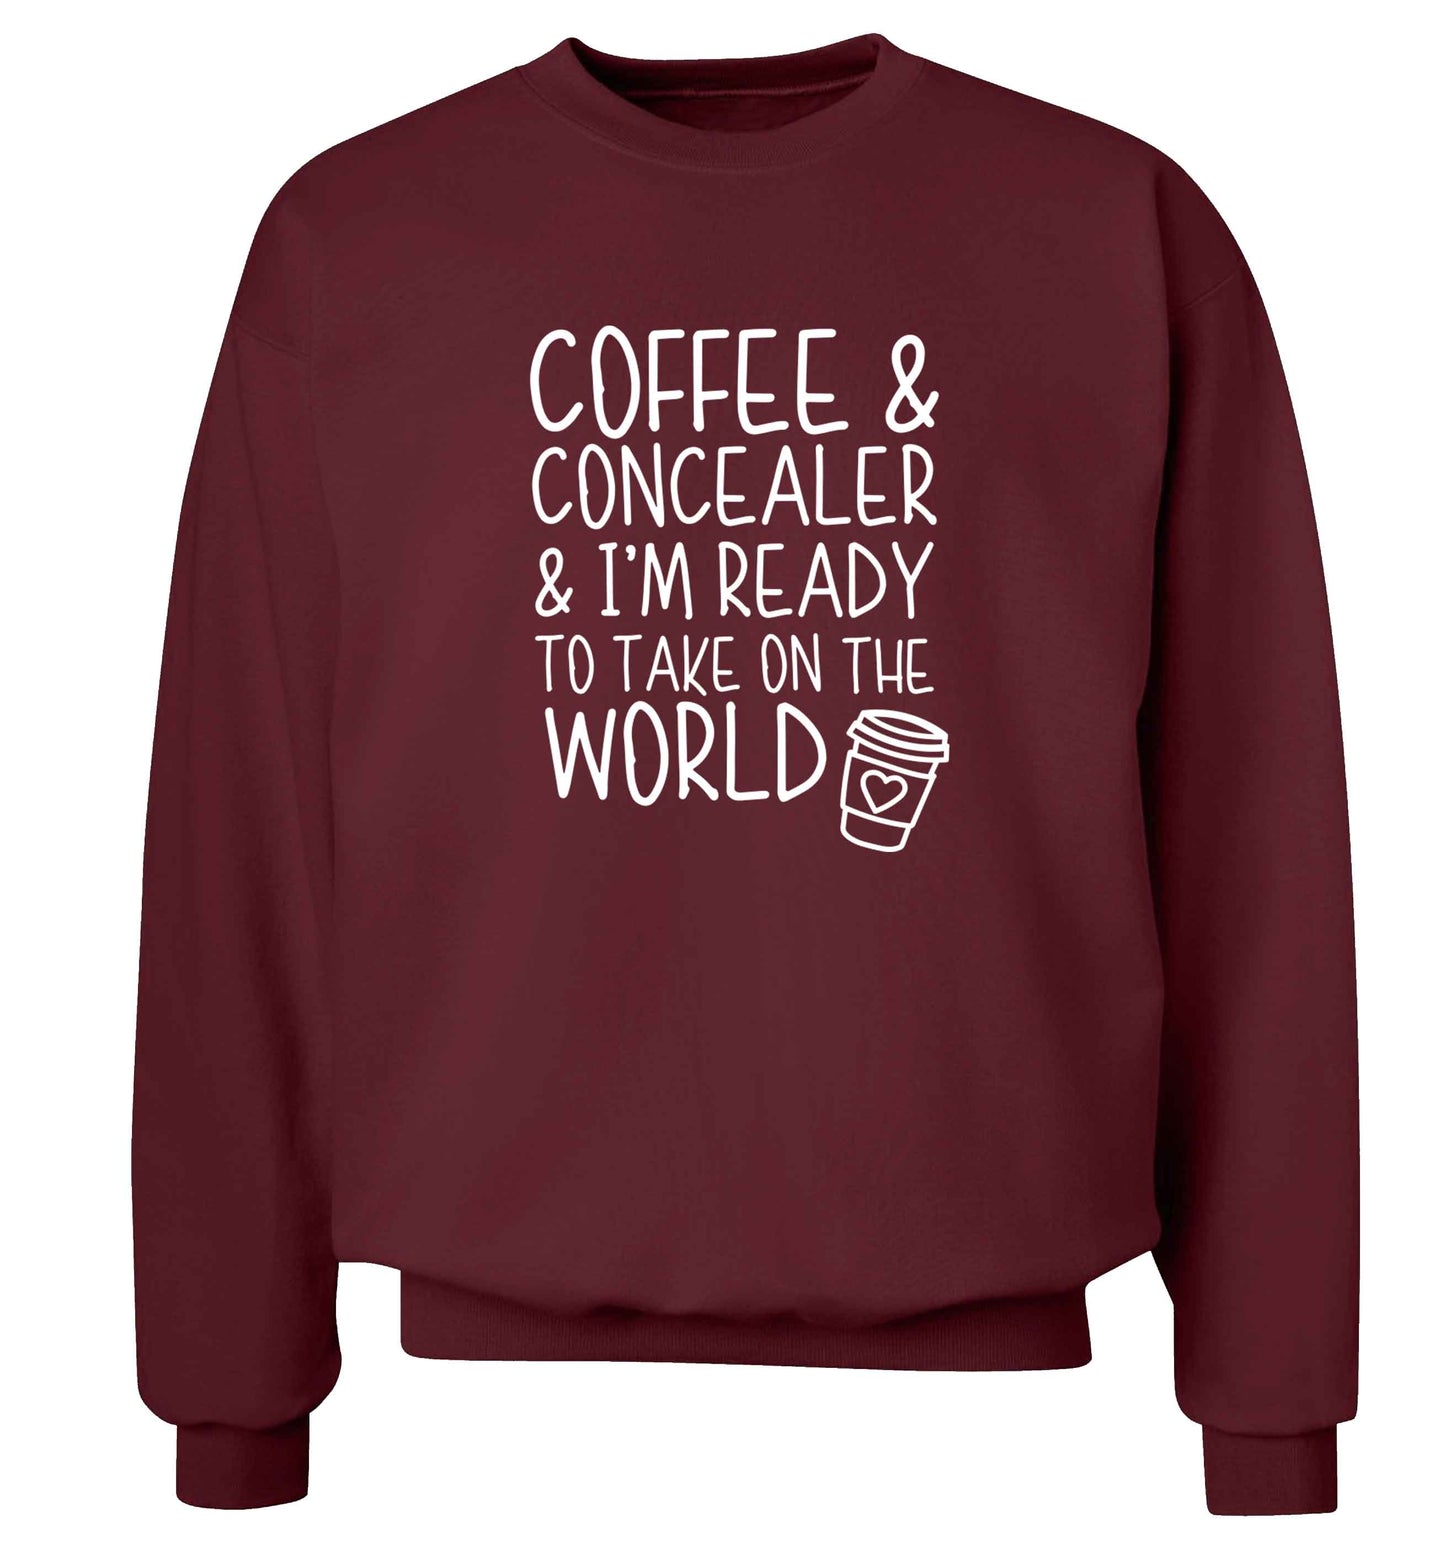 Coffee and concealer and I'm ready to take on the world adult's unisex maroon sweater 2XL